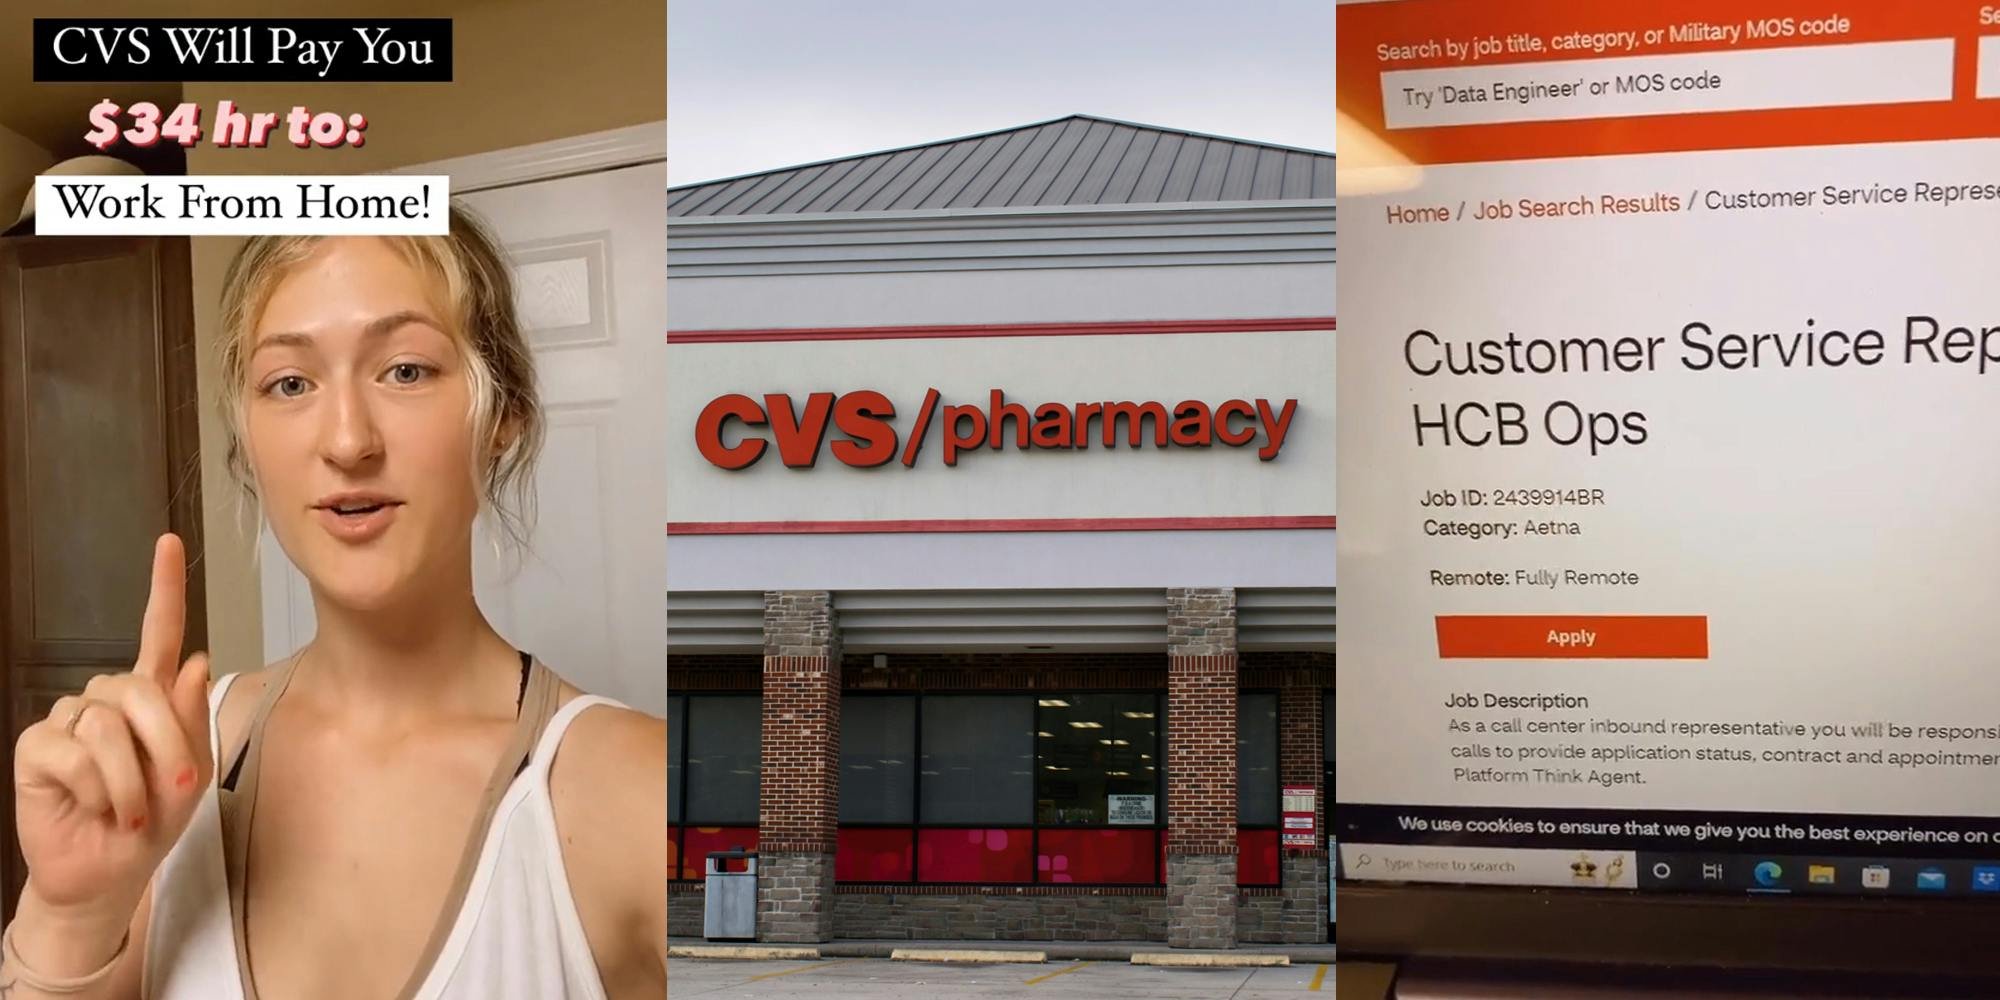 ‘I want a WFH job where I don’t have to speak to anybody ever’: Worker recommends CVS WFH job that allegedly pays $34 an hour